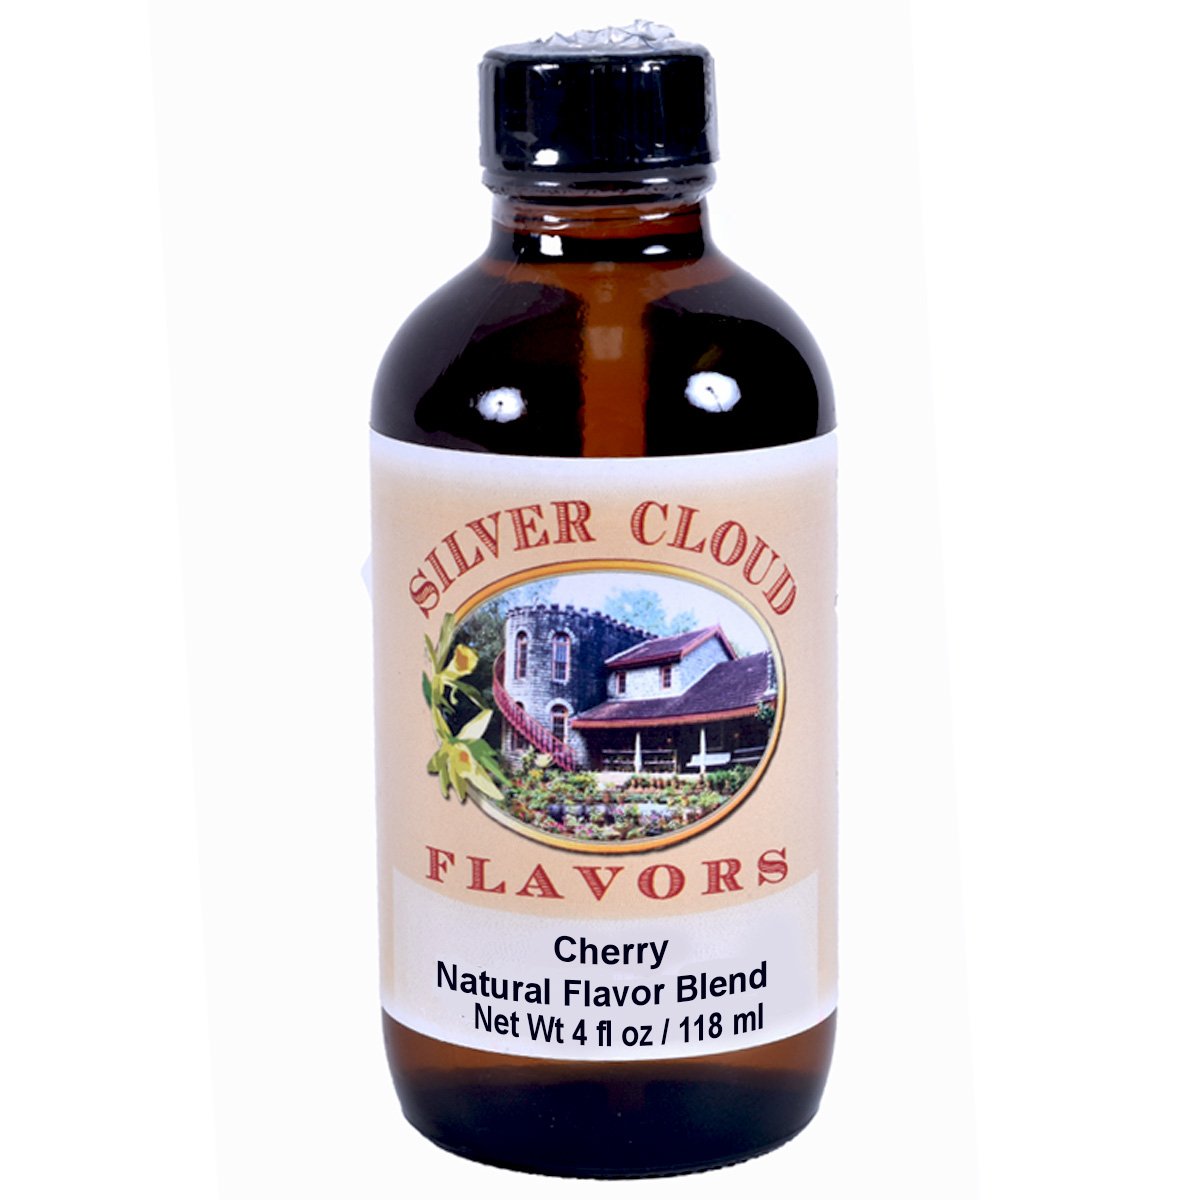 Cherry, Natural Flavor Blend Silver Cloud Extract - Bake Supply Plus